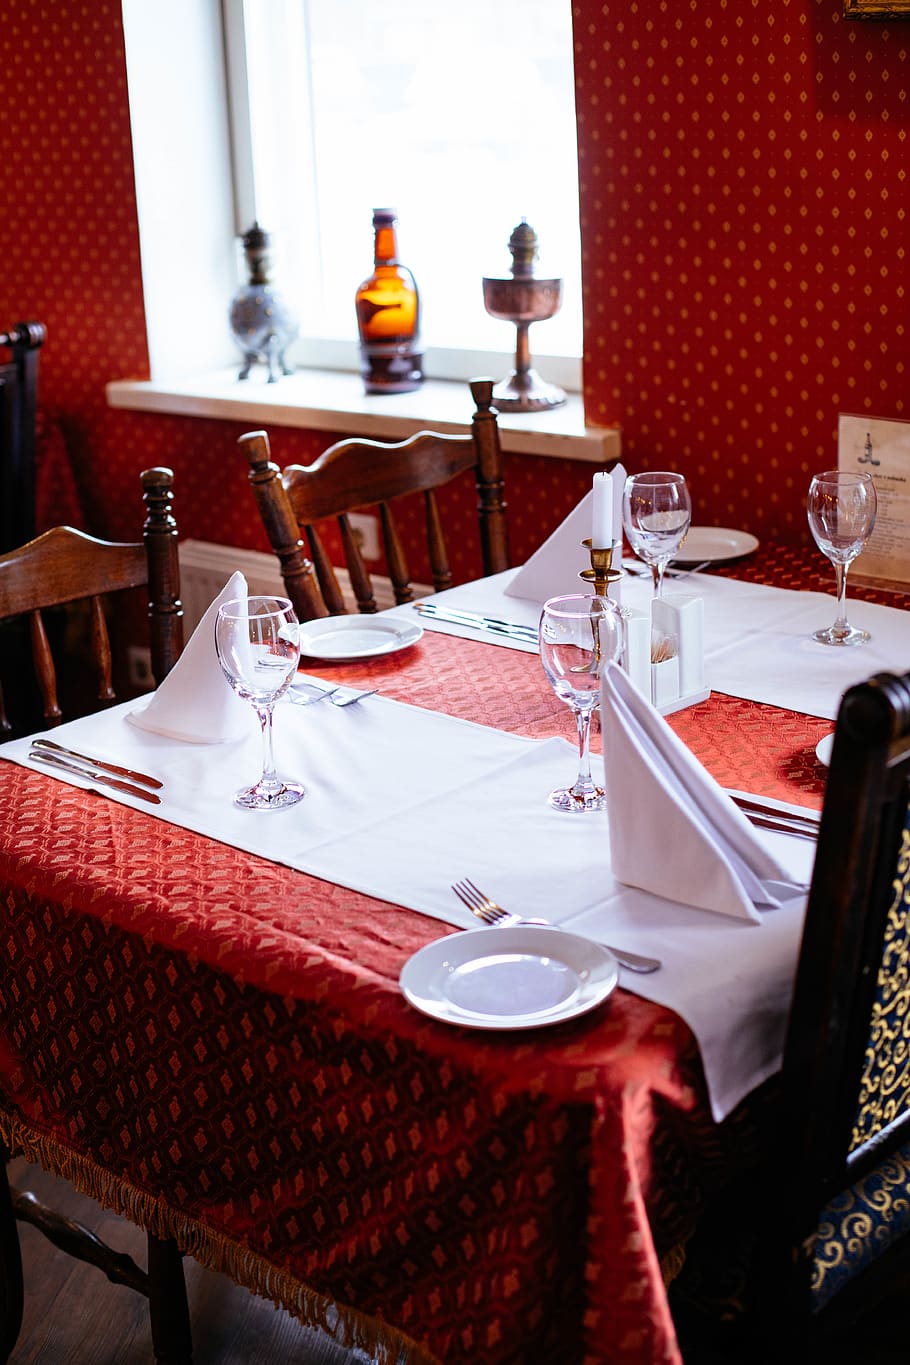 Fine Dining Service, chair, cutlery, table setting, tablecloth